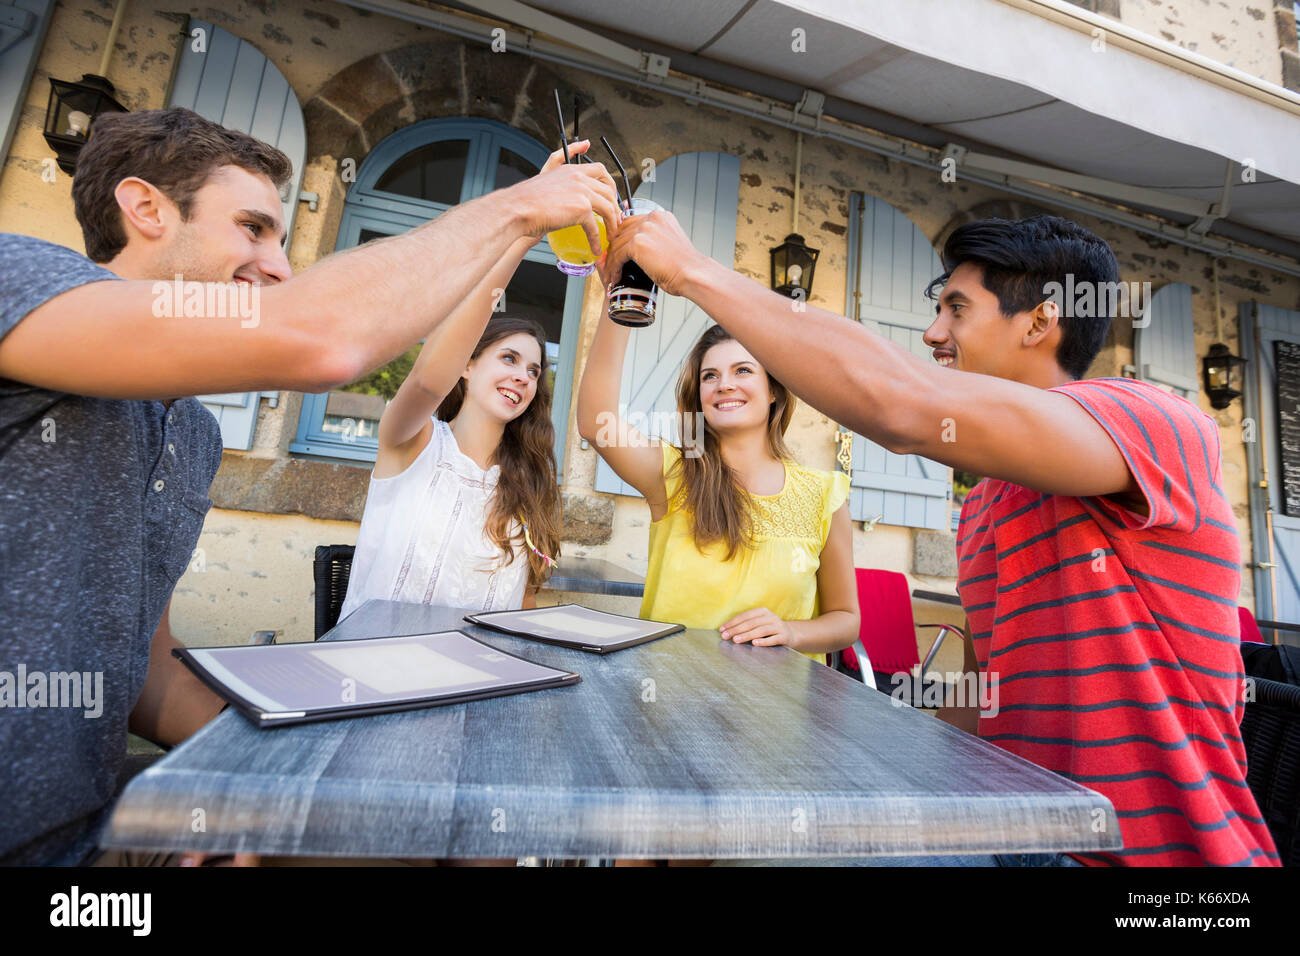 Friends toasting at restaurant Stock Photo